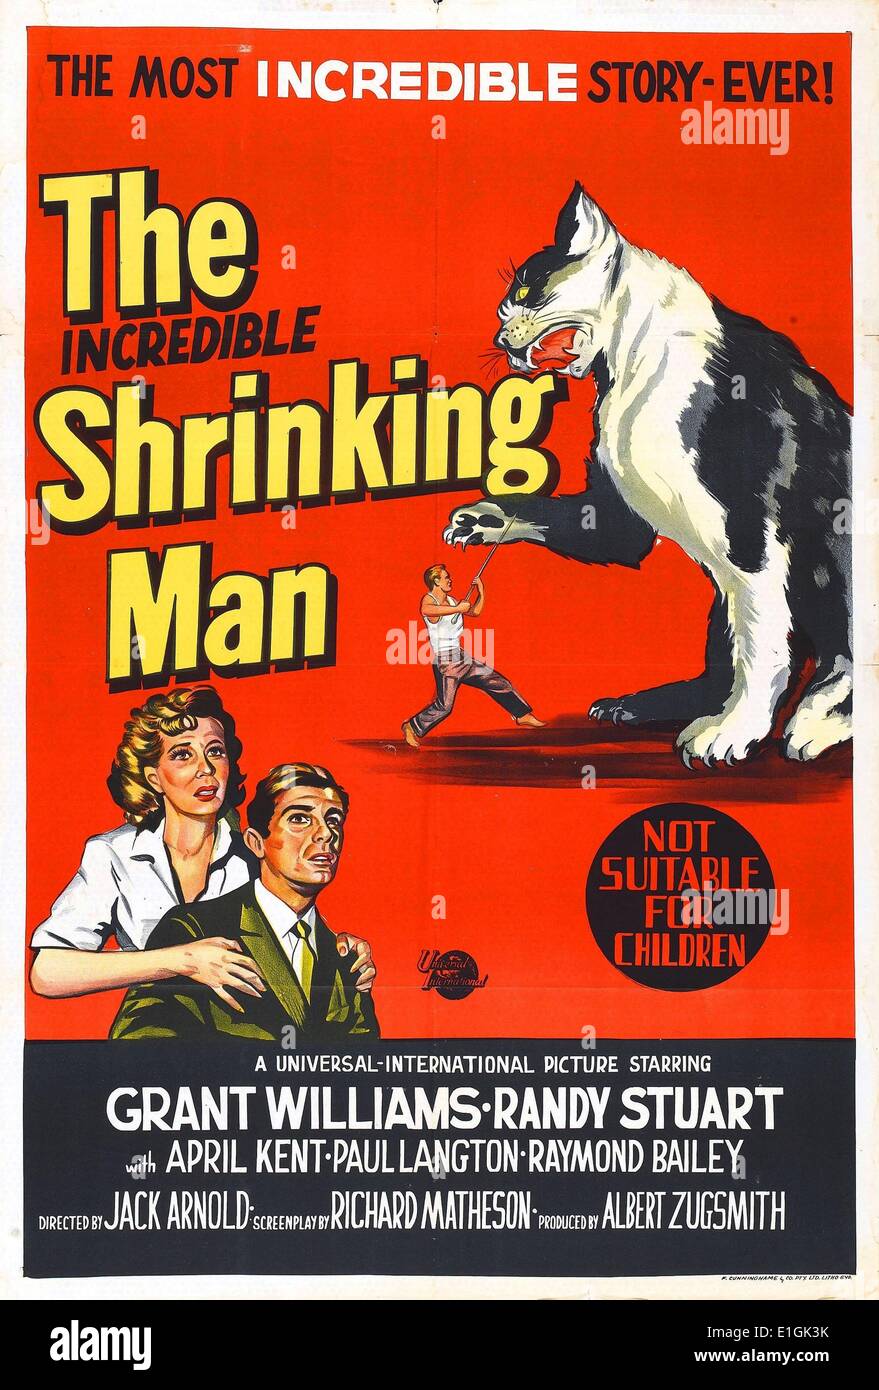 The Incredible Shrinking Man a 1957 science fiction film starring Grant Williams. Stock Photo